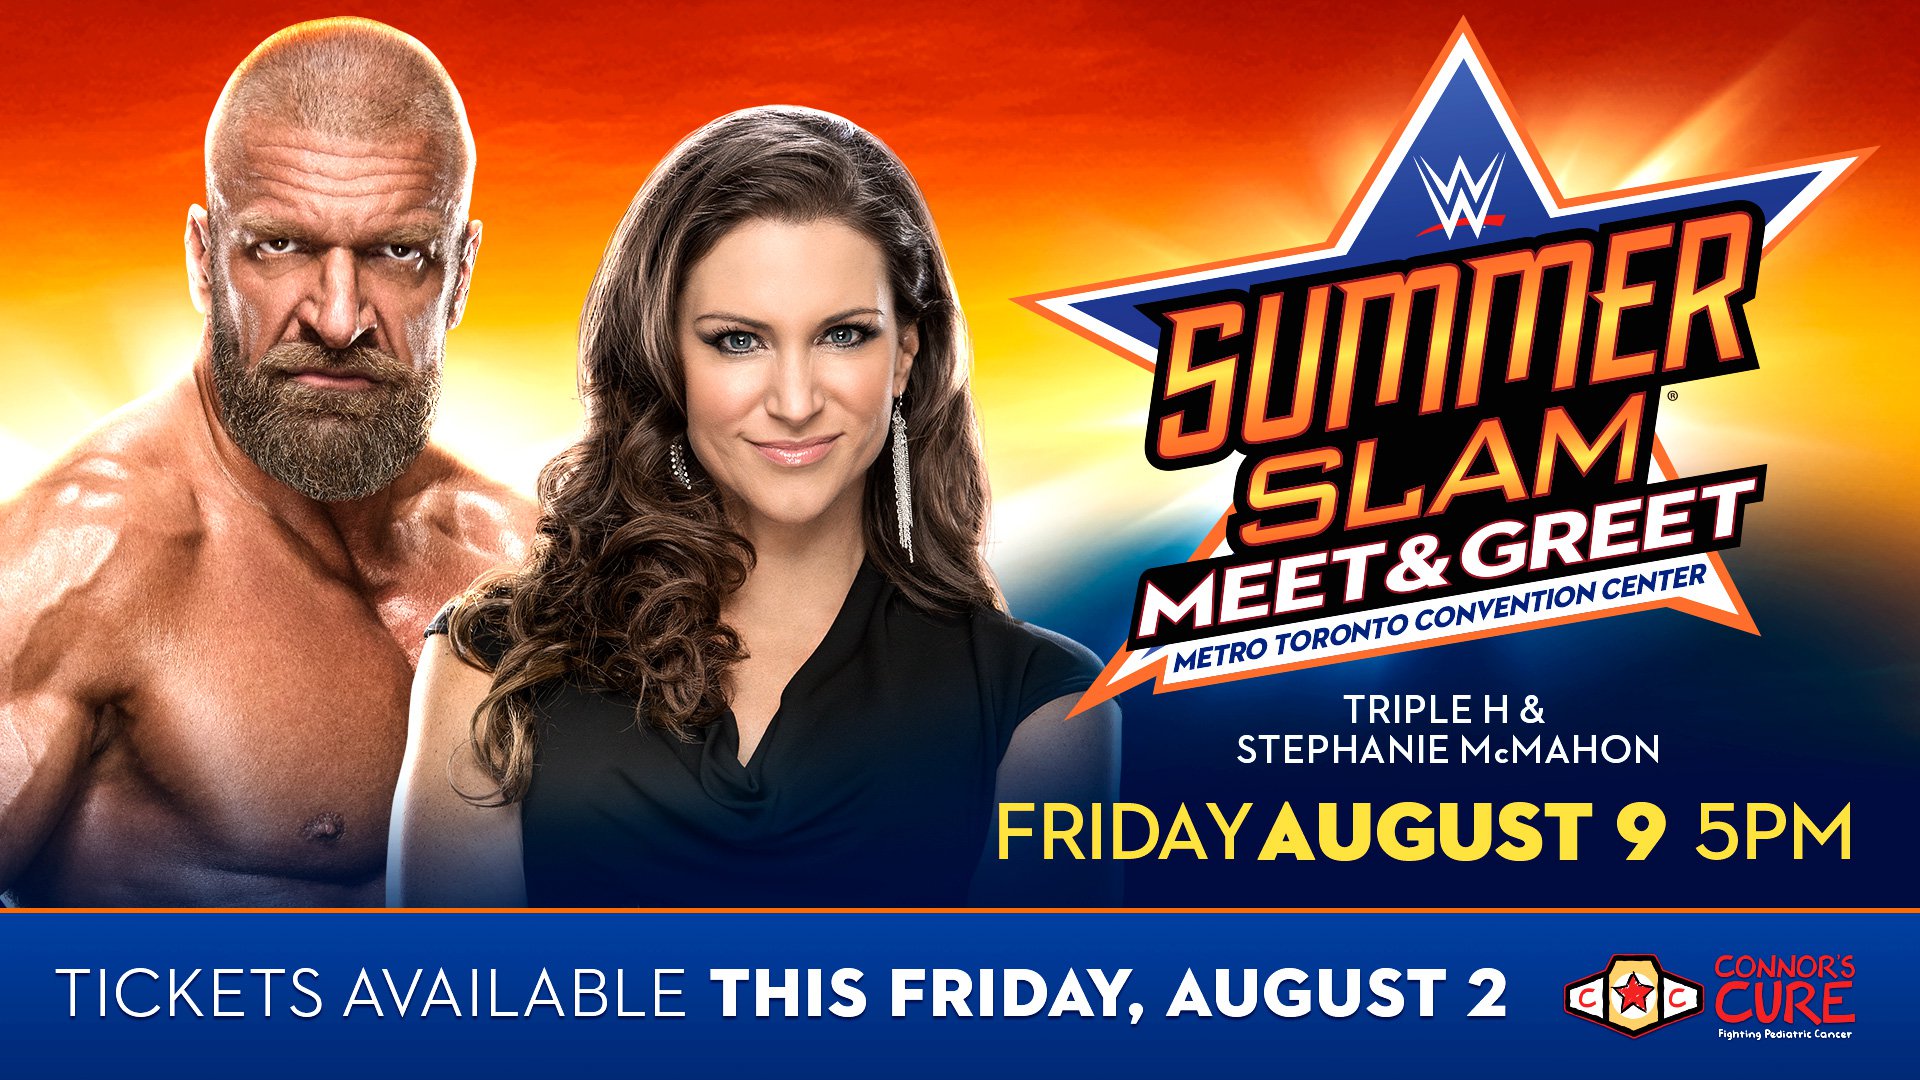 Join Triple H And Stephanie Mcmahon For A Special Summerslam Meet And Greet To Benefit Connors